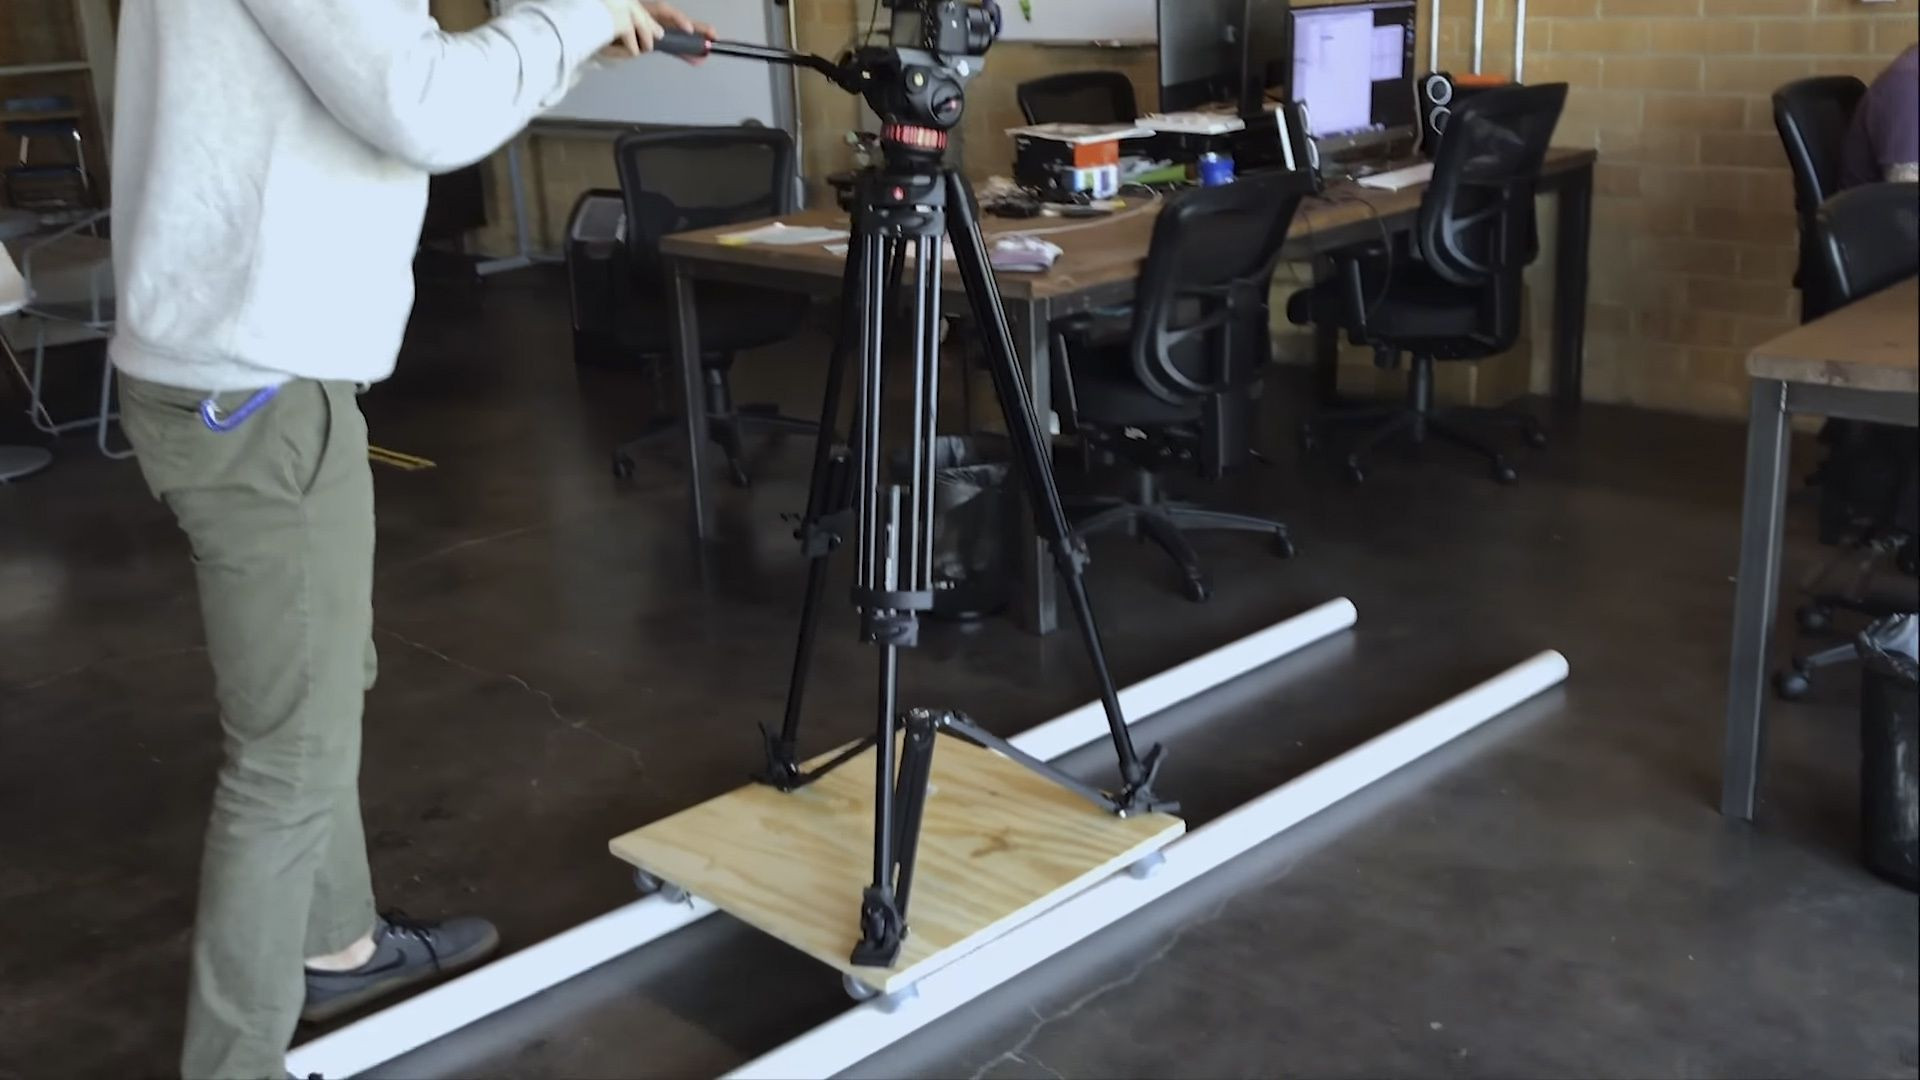 DIY Dolly Track
 How to build your own DIY track dolly for under $50 DIY